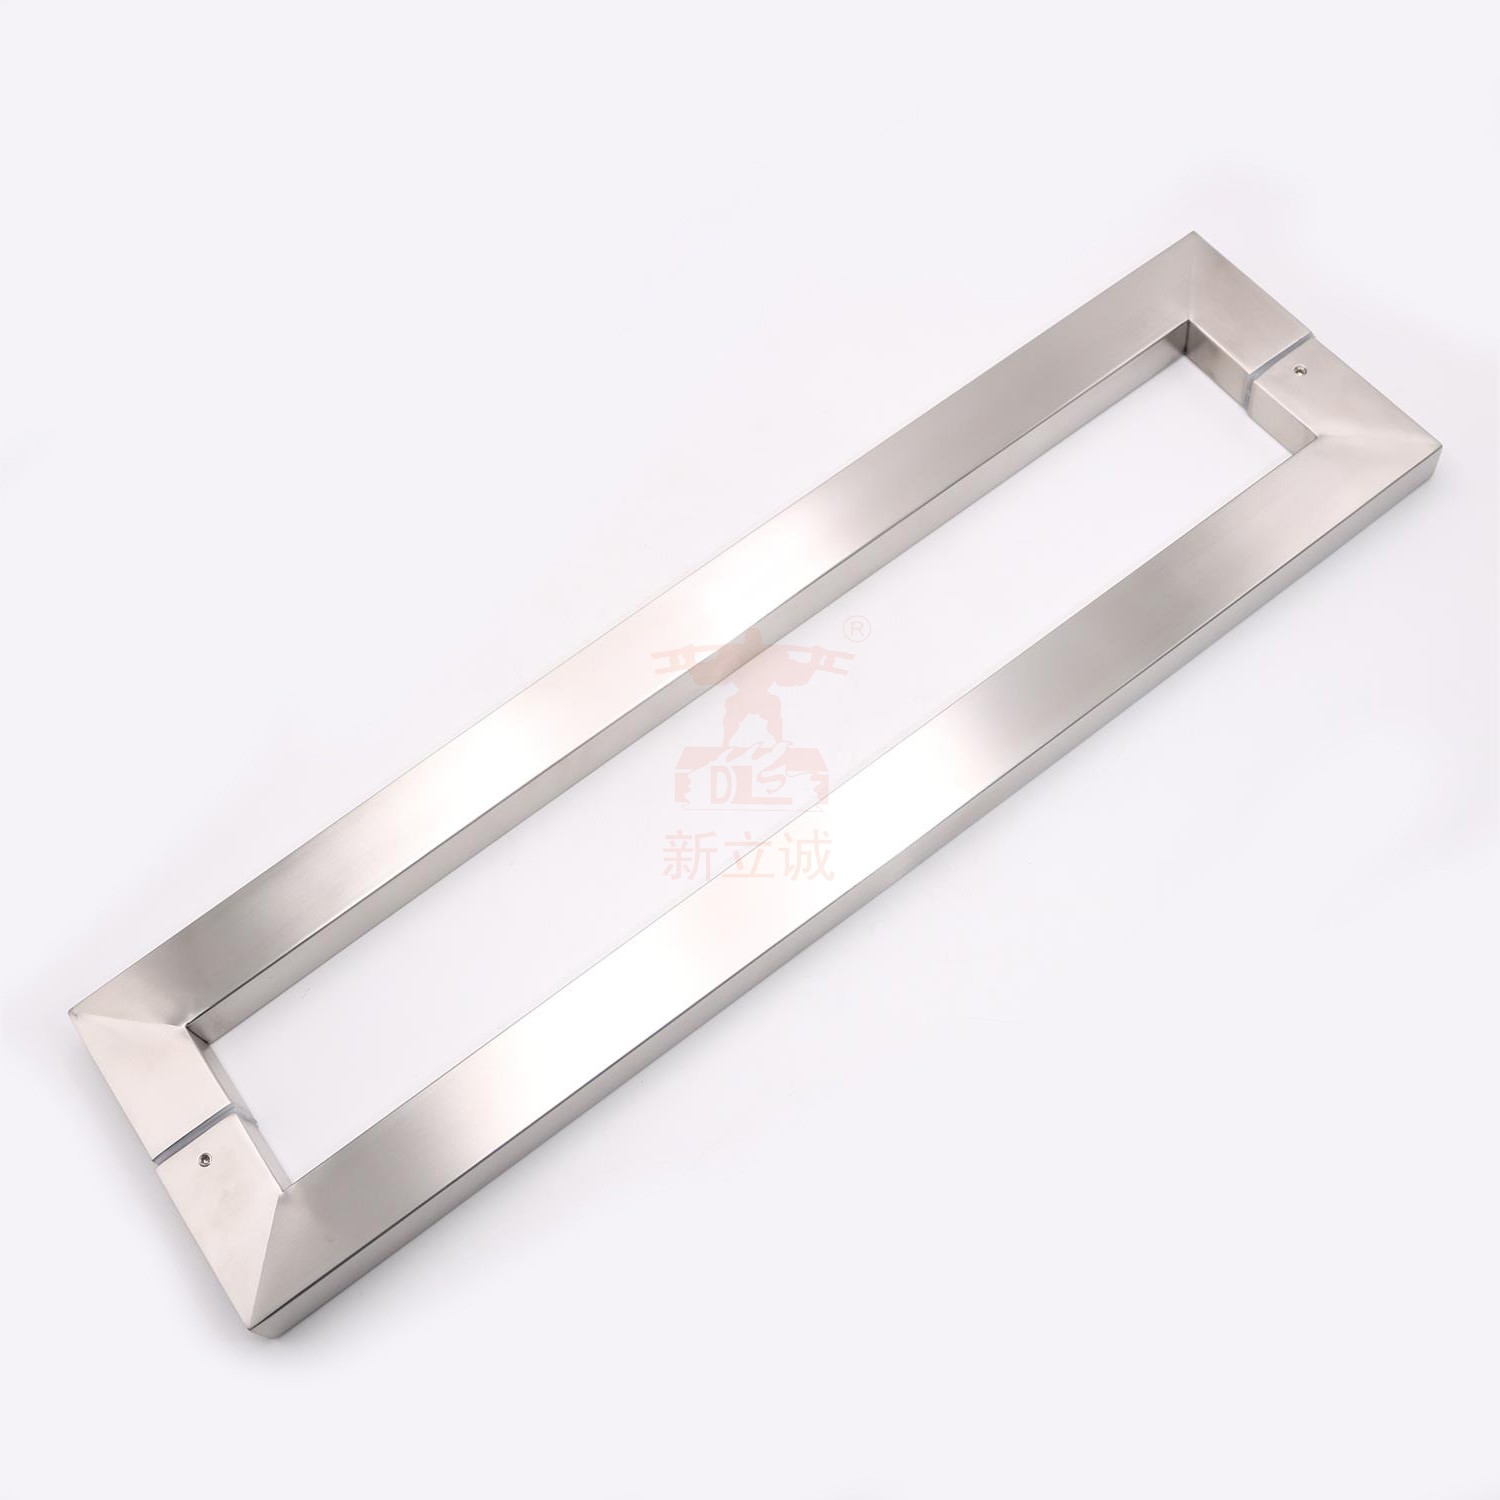 RONGYAO-6035 Stainless Steel Modern Design Glass Door Handles | H Shape Stainless